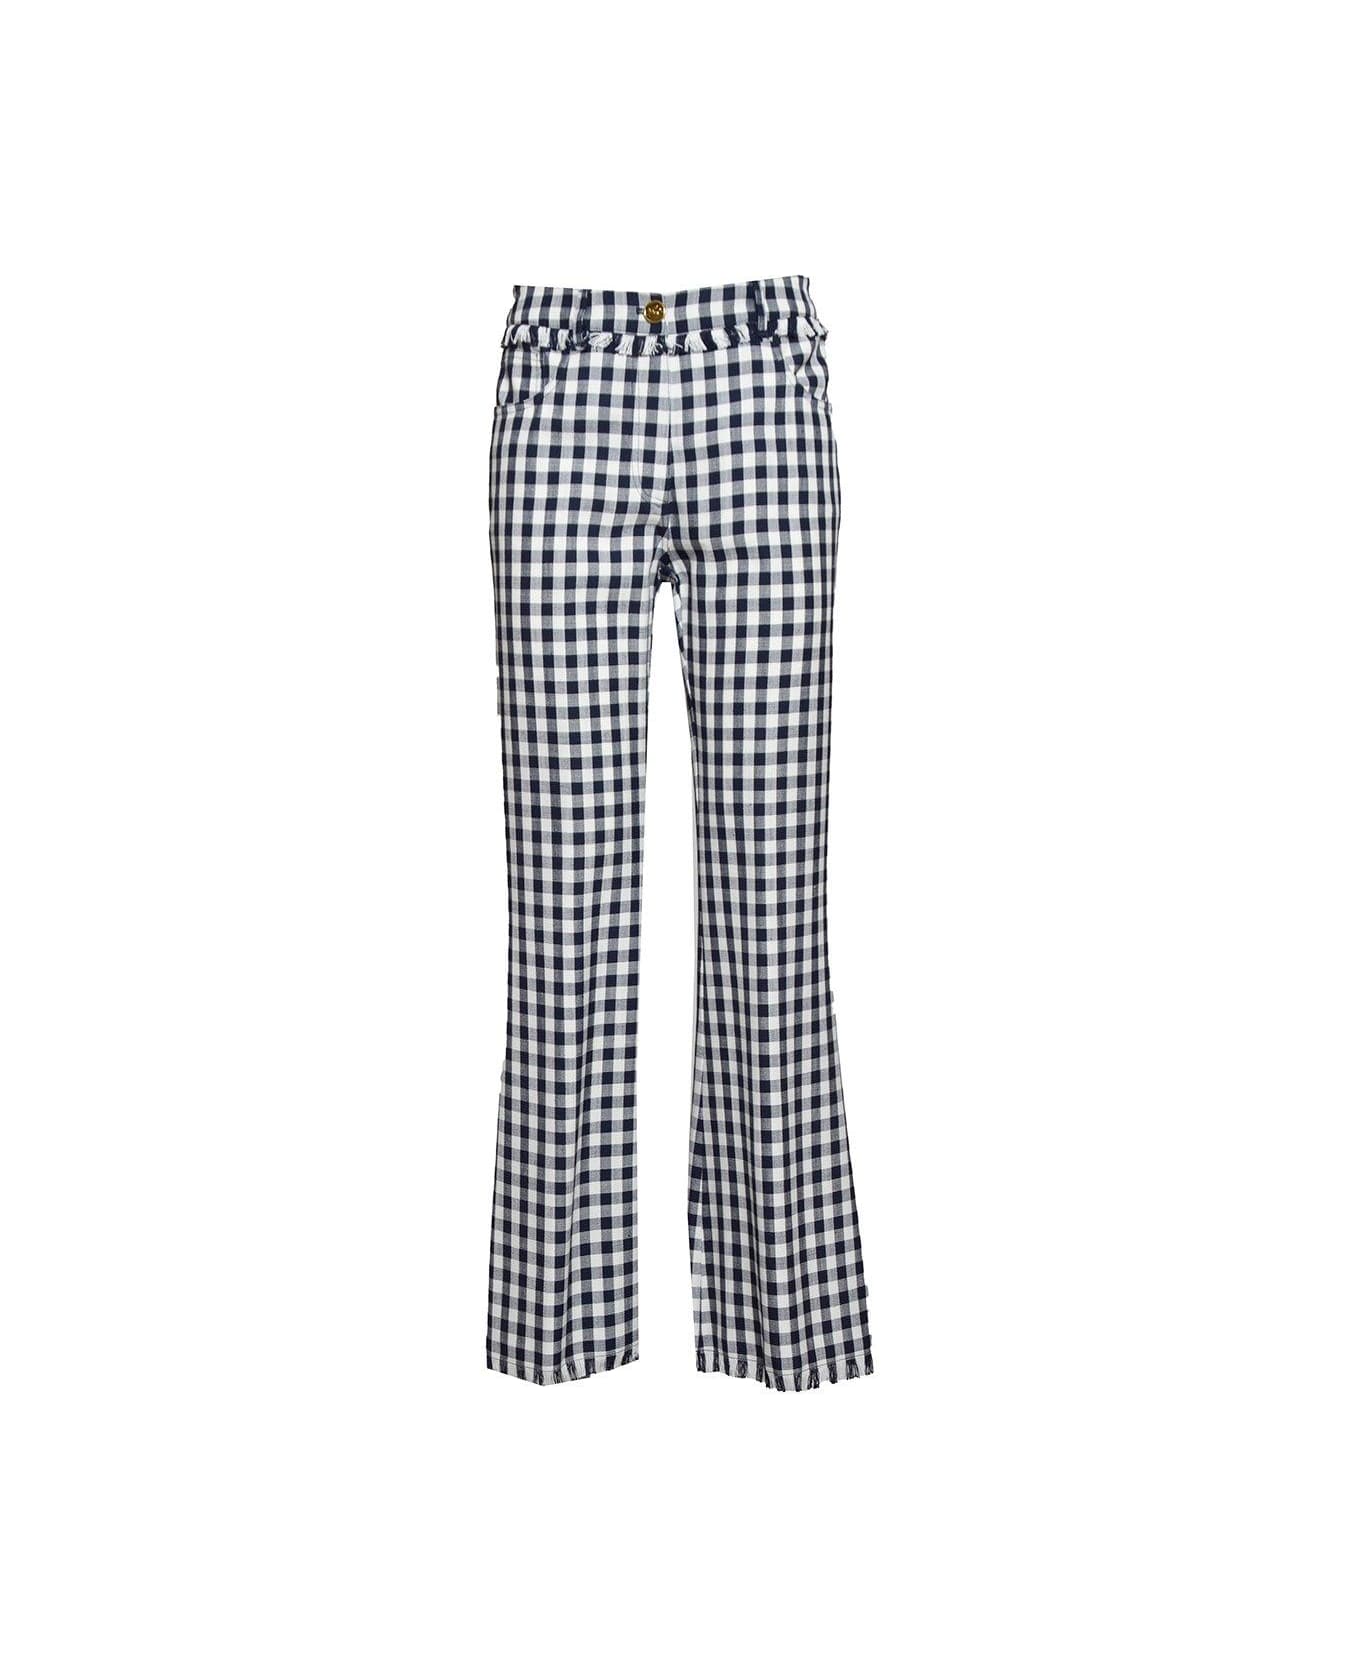 Etro Mid Rise Gingham Checked Trousers - Bianco/nero